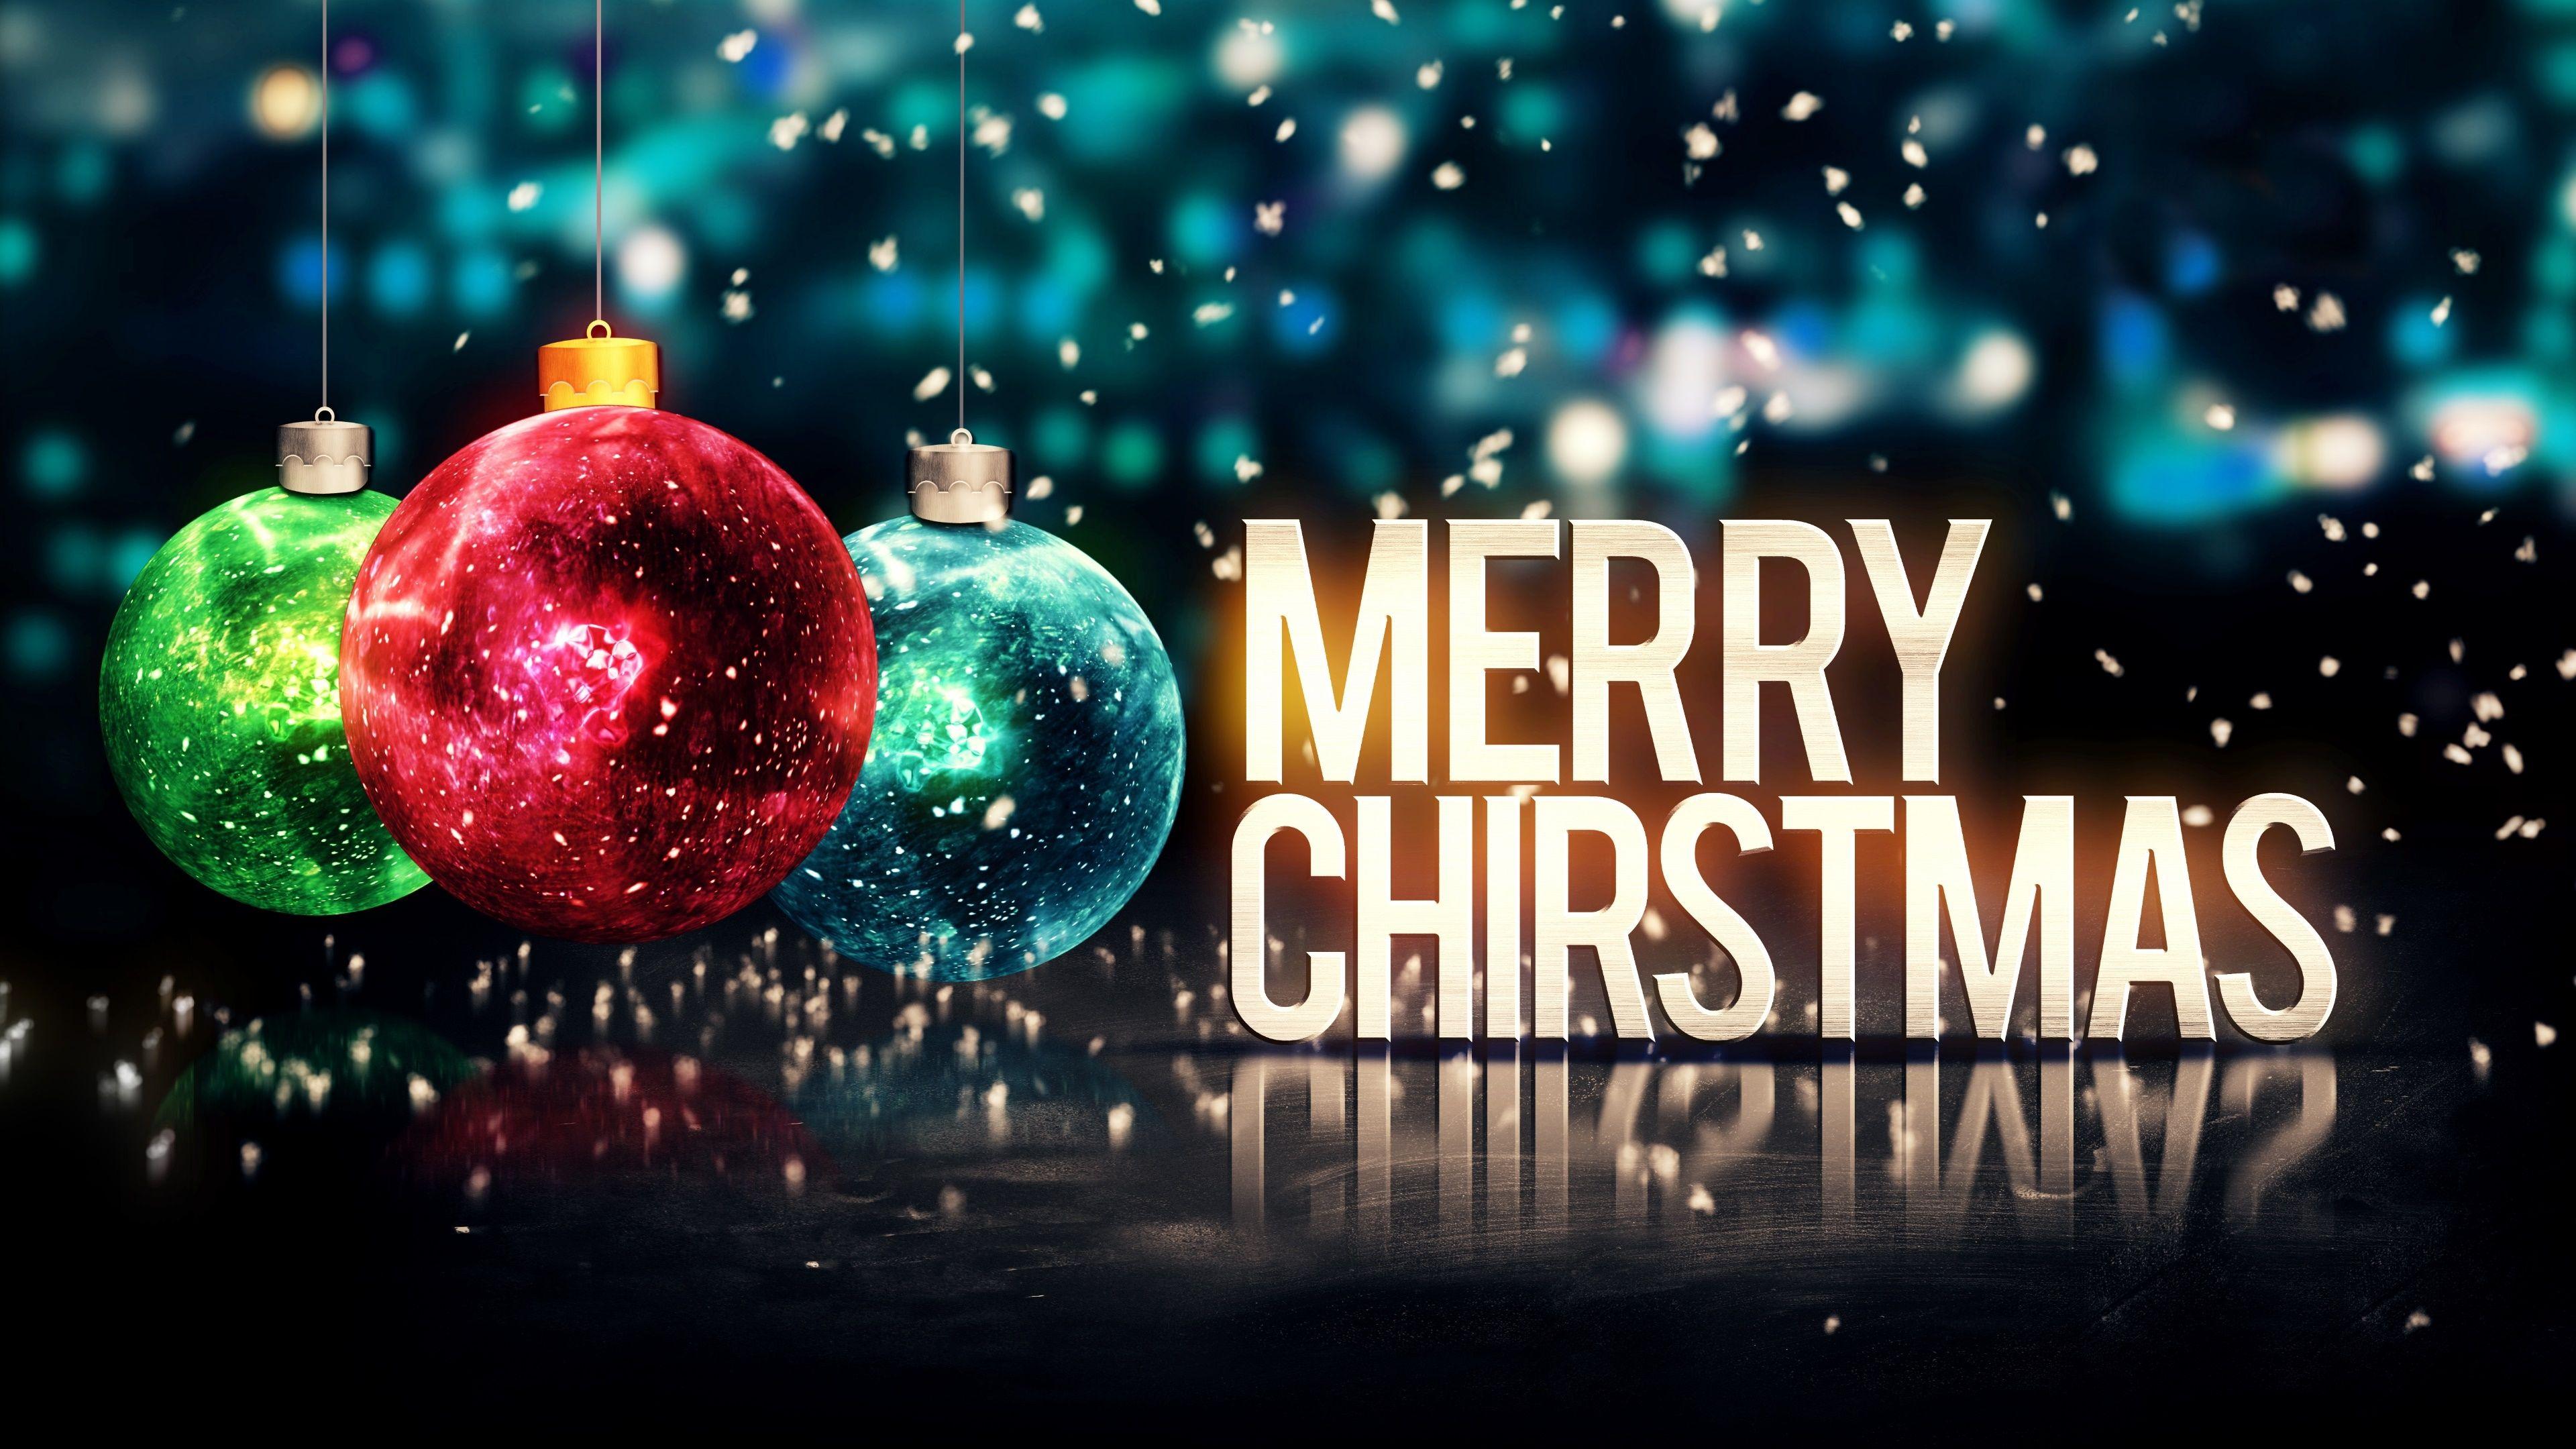 Merry Christmas Wallpapers, Pictures, Image